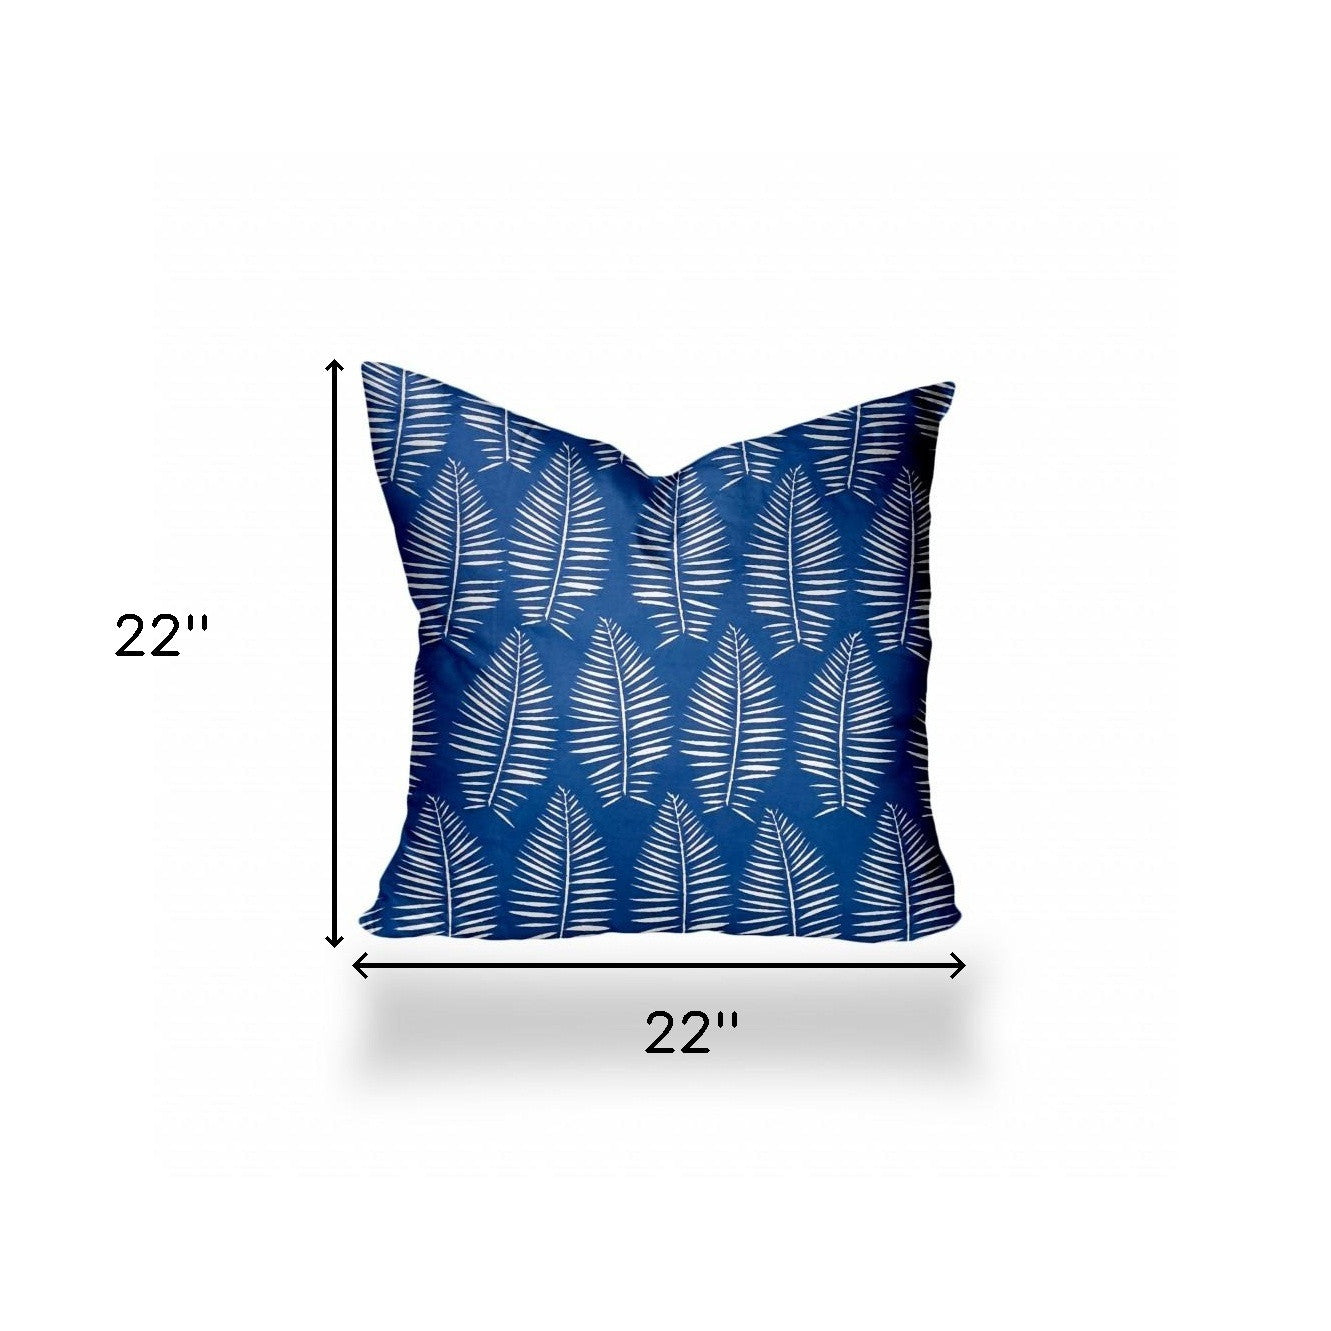 22" X 22" Blue And White Enveloped Tropical Throw Indoor Outdoor Pillow